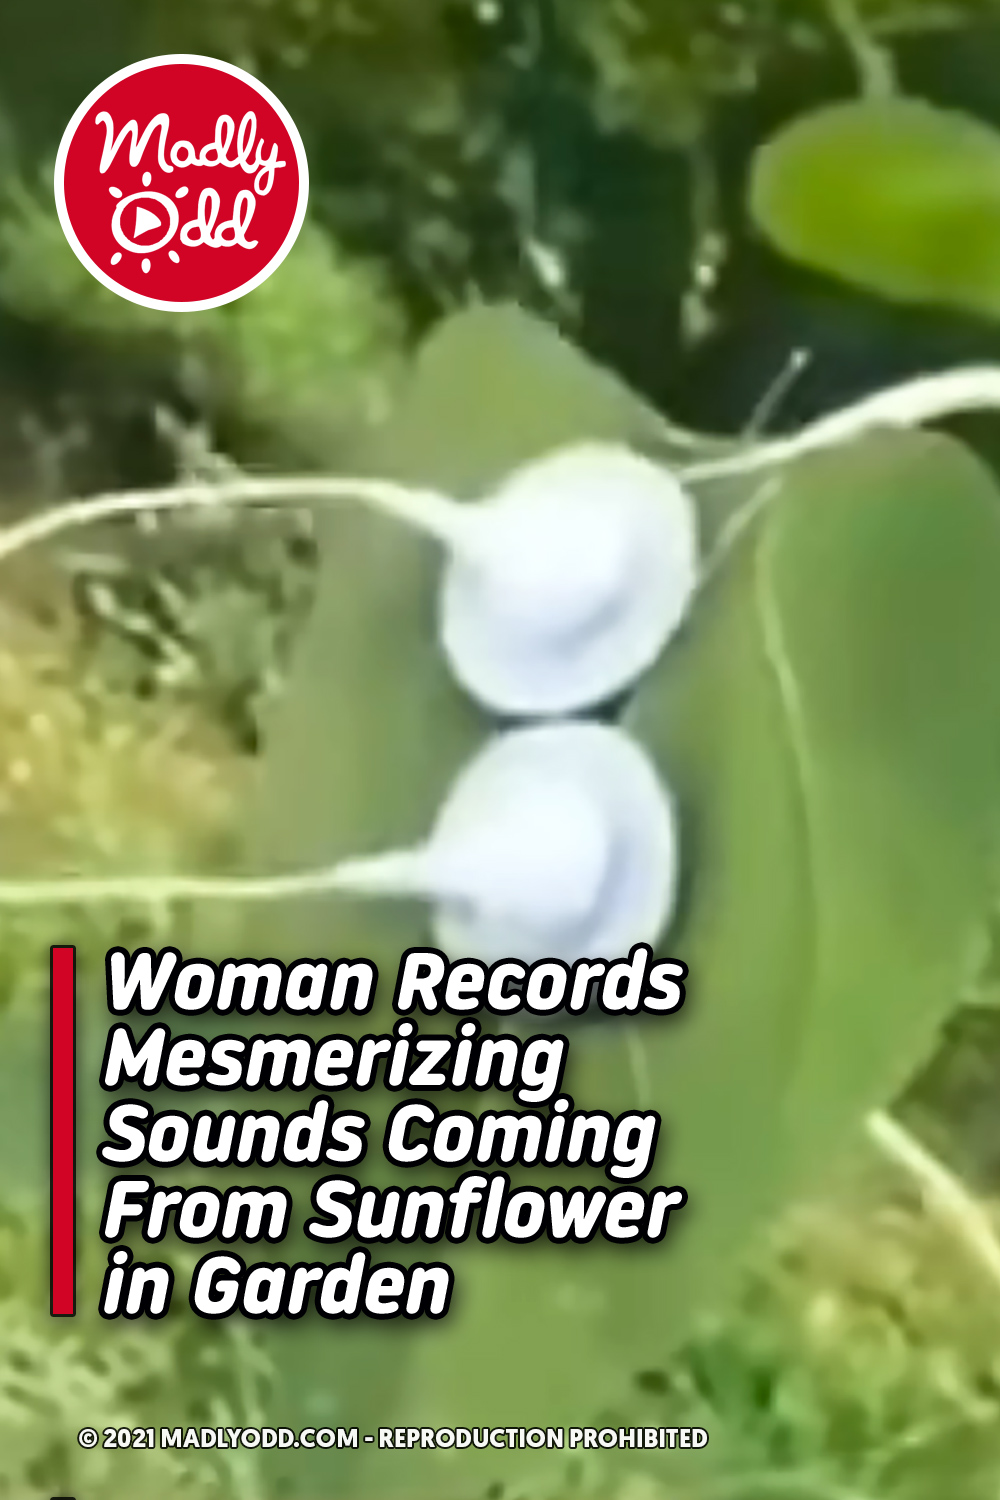 Woman Records Mesmerizing Sounds Coming From Sunflower in Garden